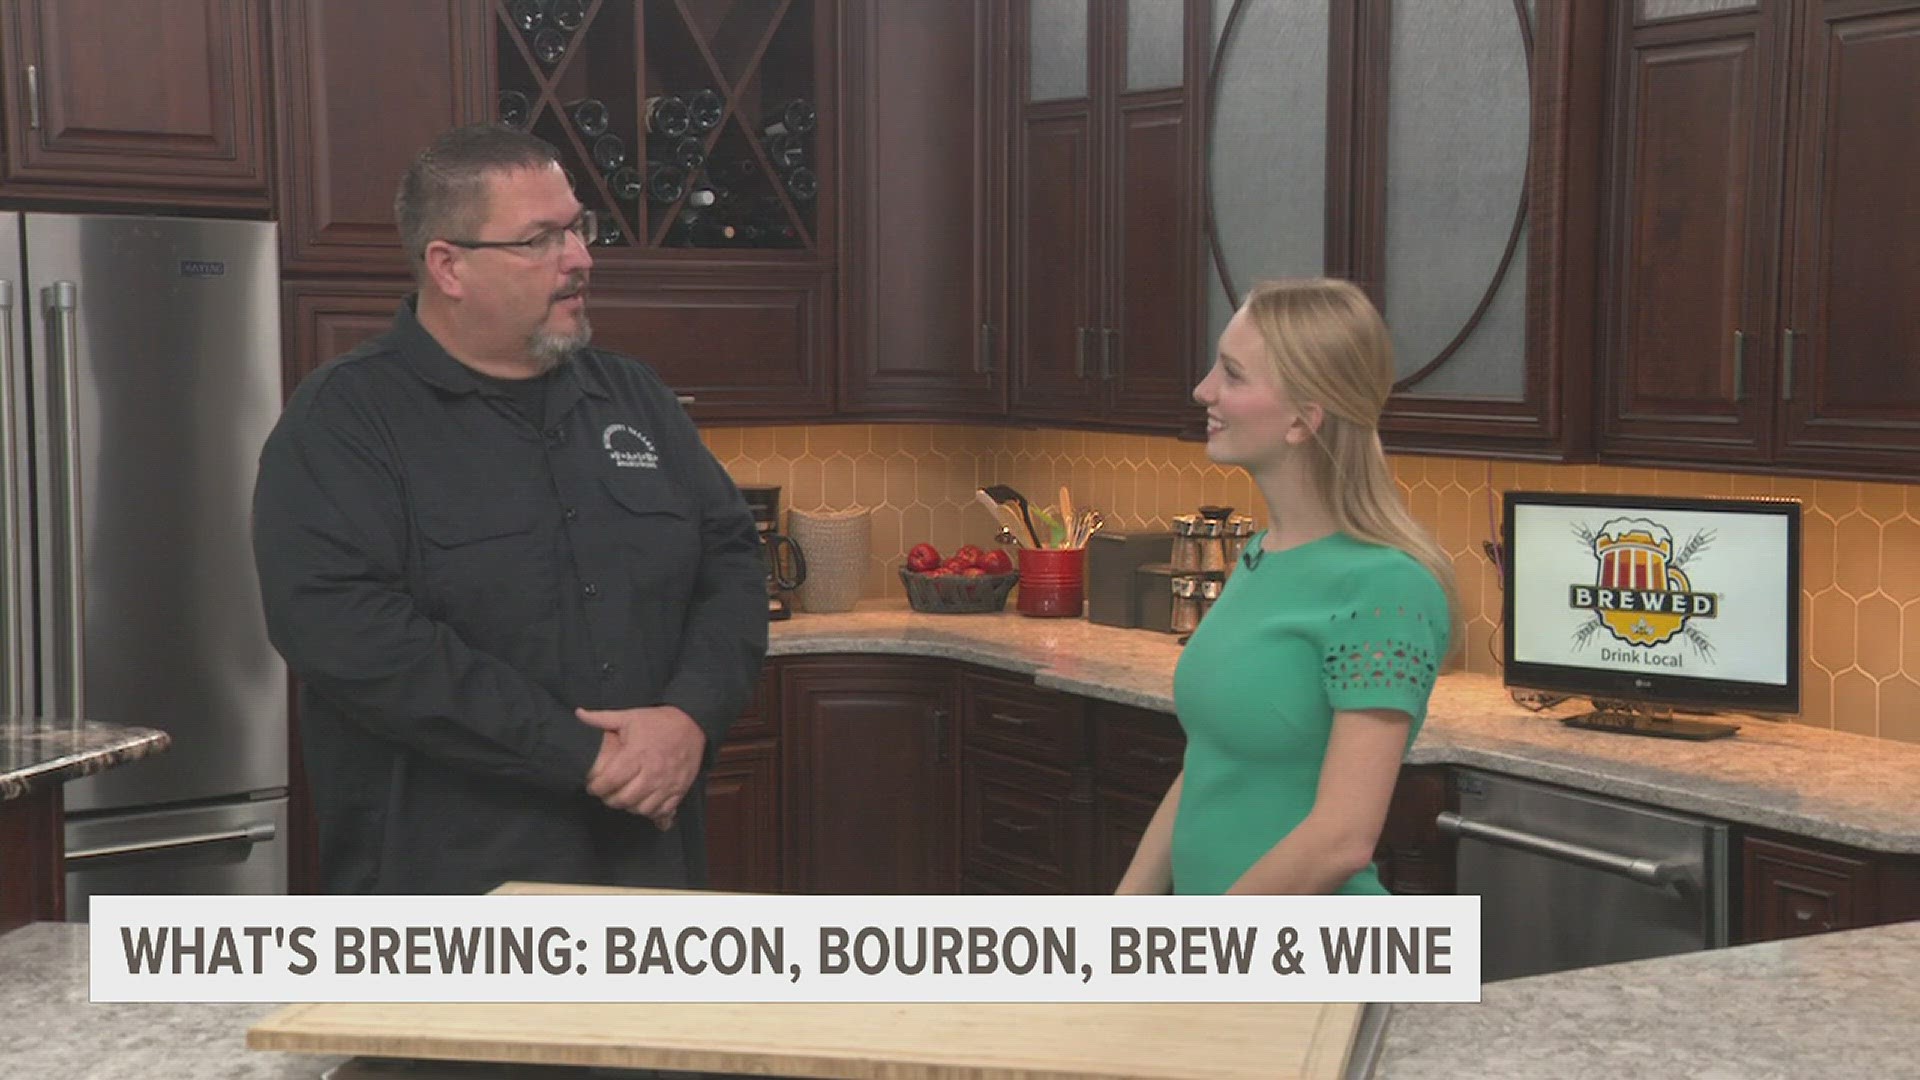 The inaugural event will feature beers from local breweries, Bulleit bourbons, wines from area wineries and bacon samples from local restaurants.